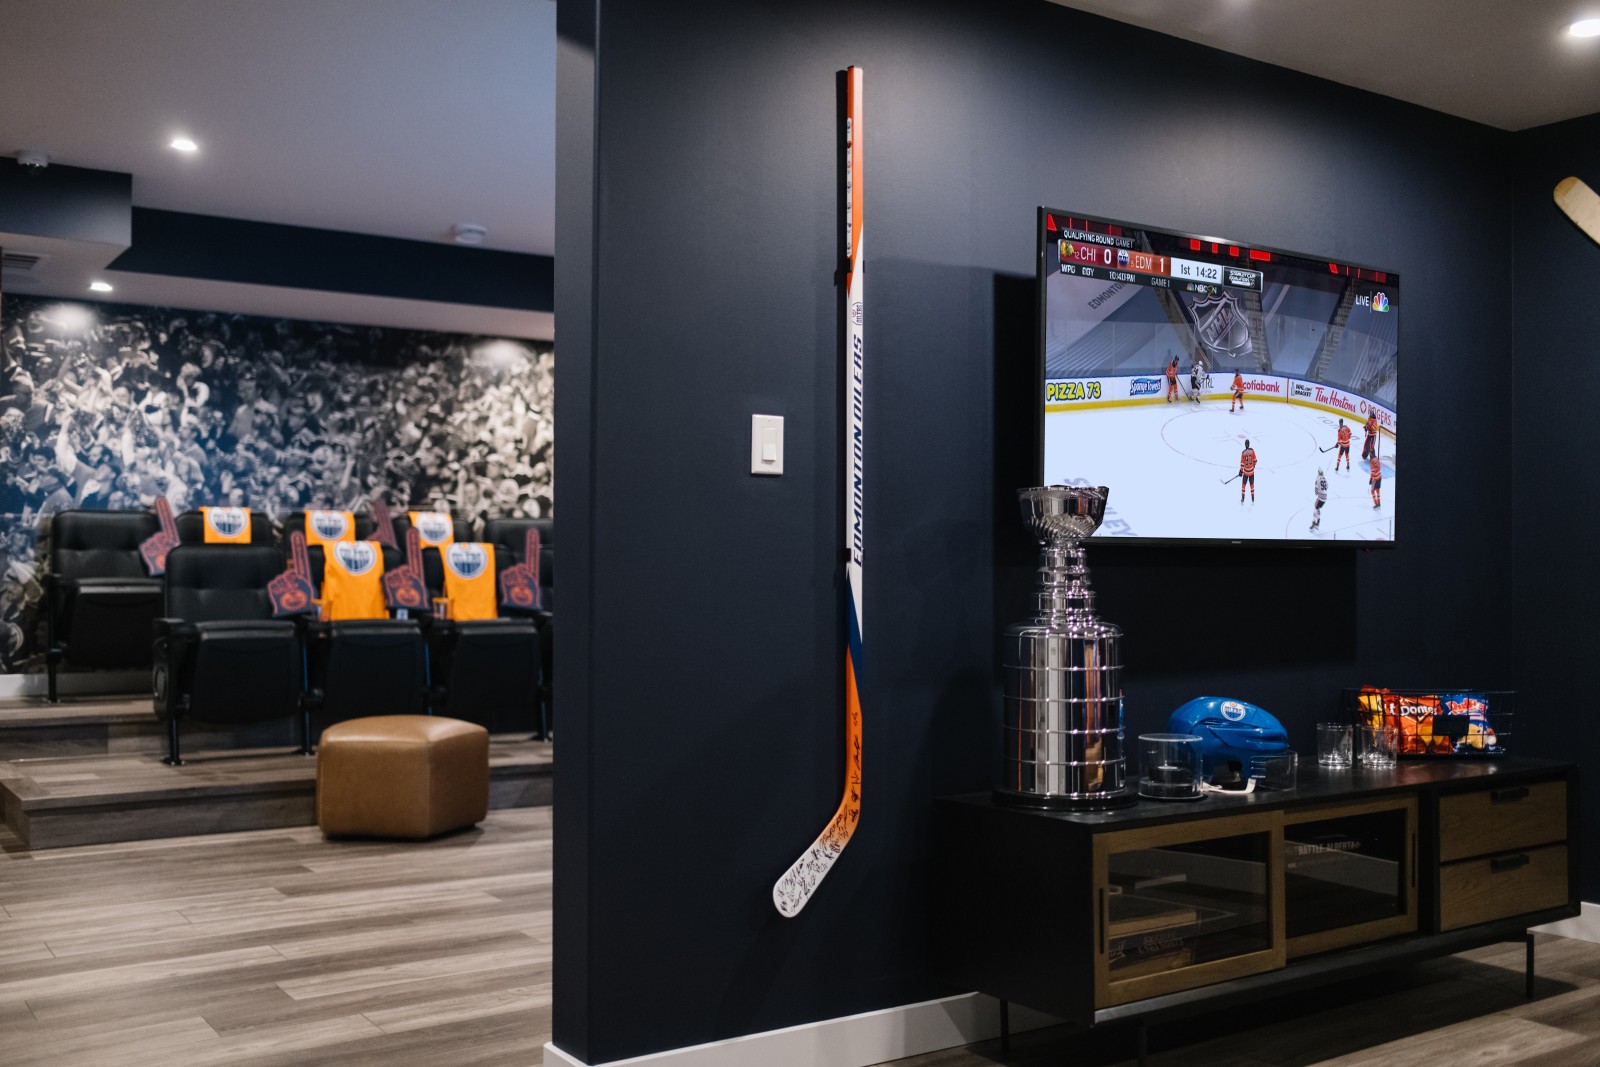 Oilers Fan Cave in the basement of the Nysa showhome in Cy Becker. A large tv and hockey stick are mounted to the dark blue wall. Stadium seats in front of a mural of a crowd in the arena can be seen behind